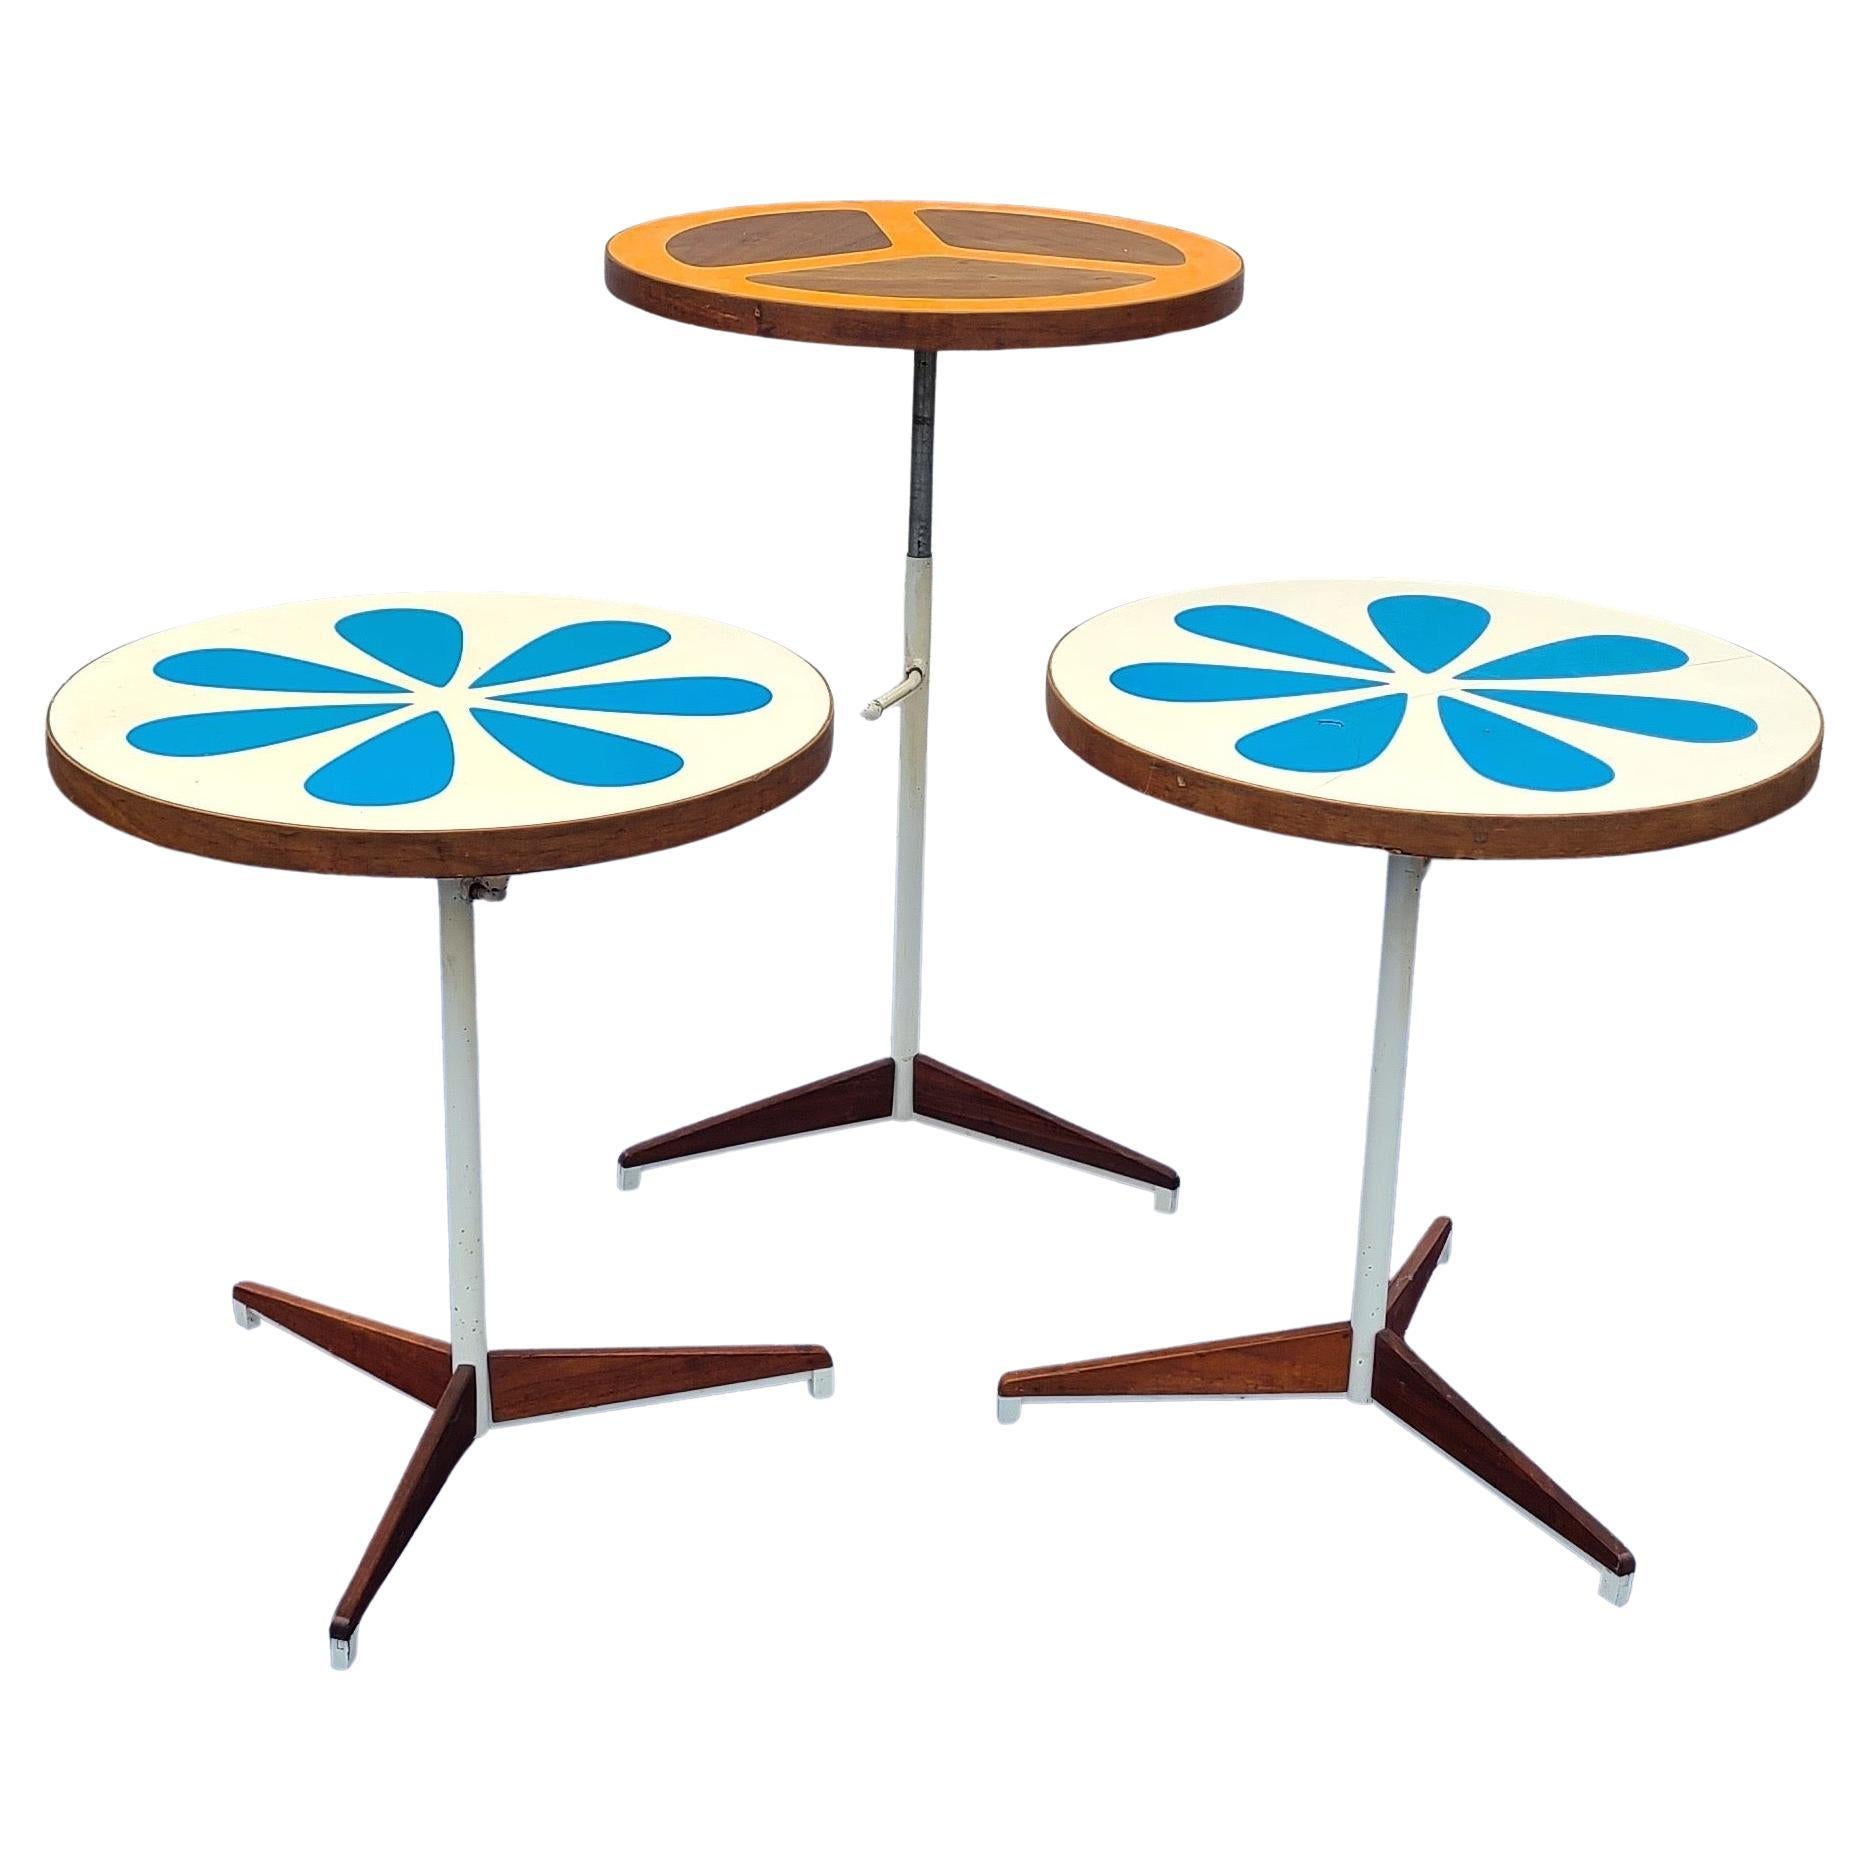 American Set of 3 Side Tables by Don Savage and Howard McNab for Peter Pepper Products